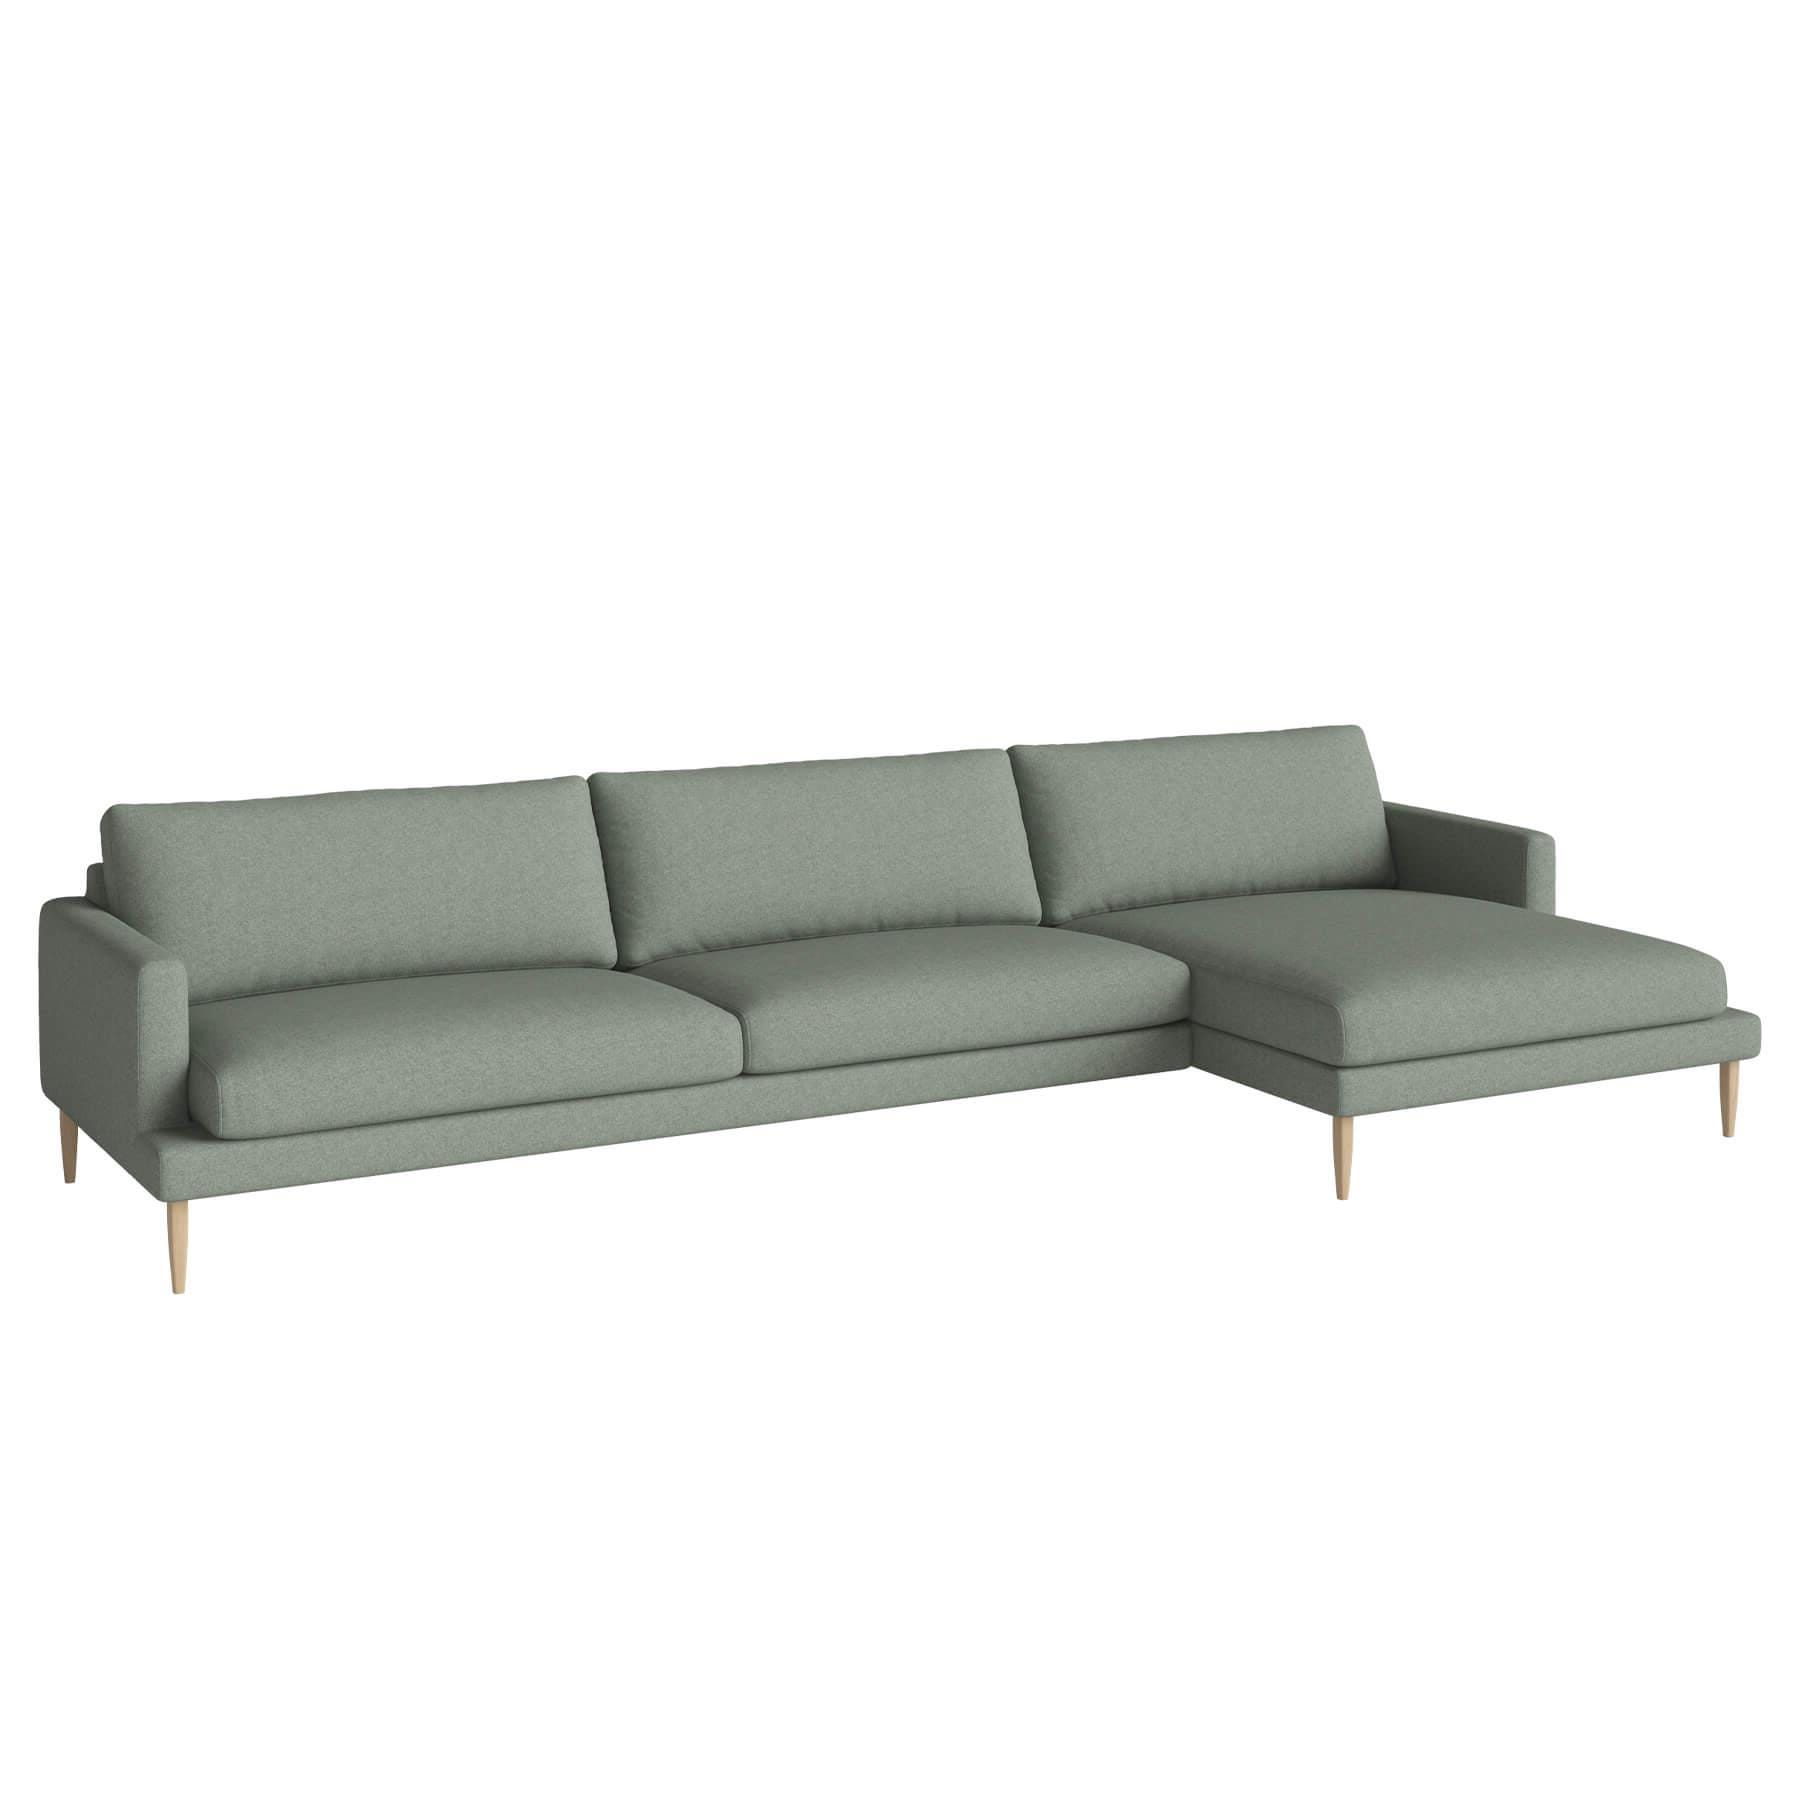 Bolia Veneda Sofa 45 Seater Sofa With Chaise Longue White Oiled Oak Qual Green Right Green Designer Furniture From Holloways Of Ludlow